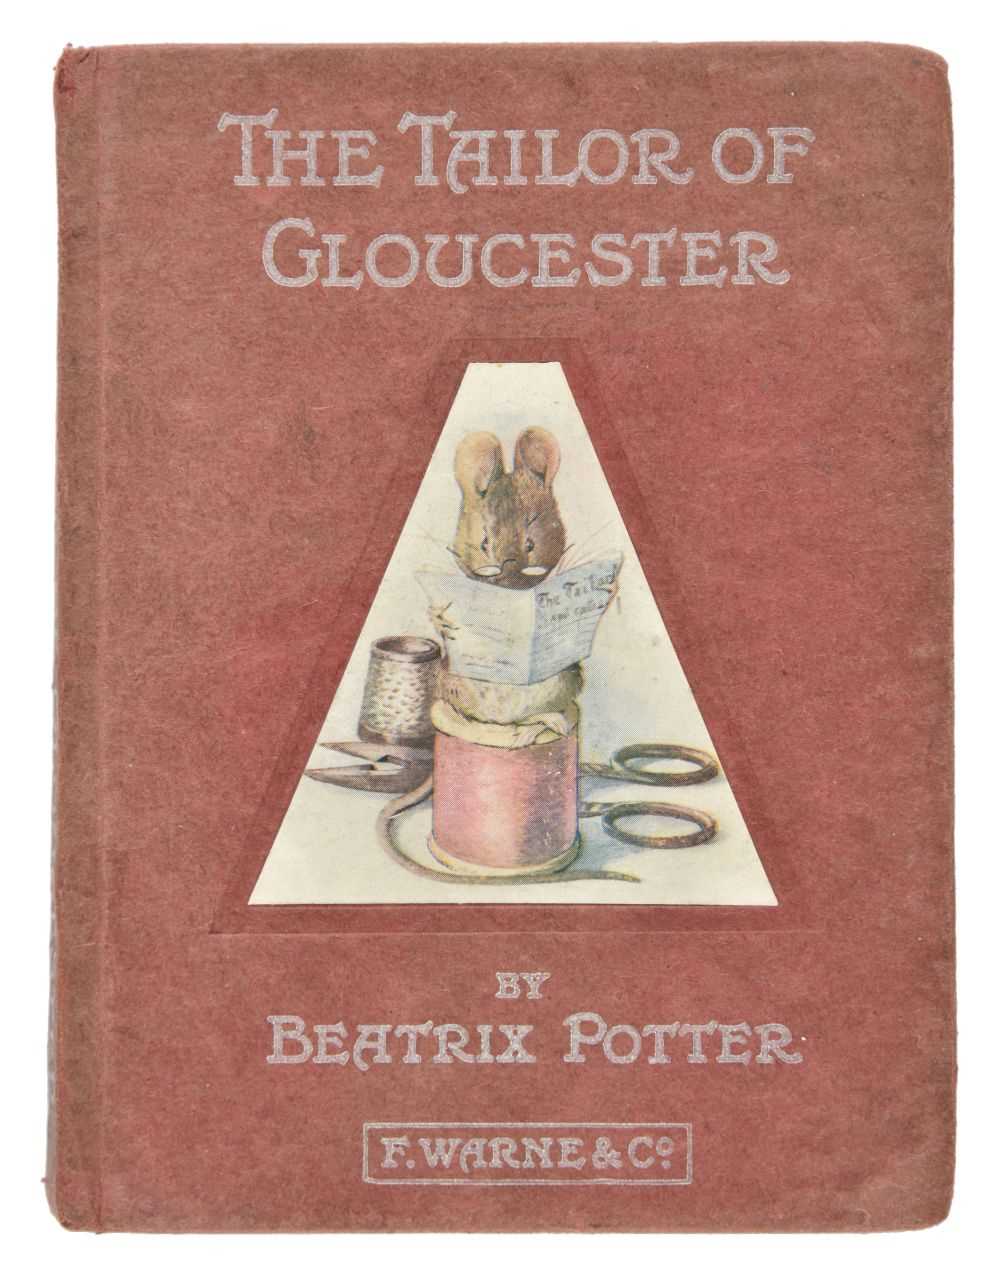 Lot 580 - Potter (Beatrix). The Tailor of Gloucester, 1st edition, 1903